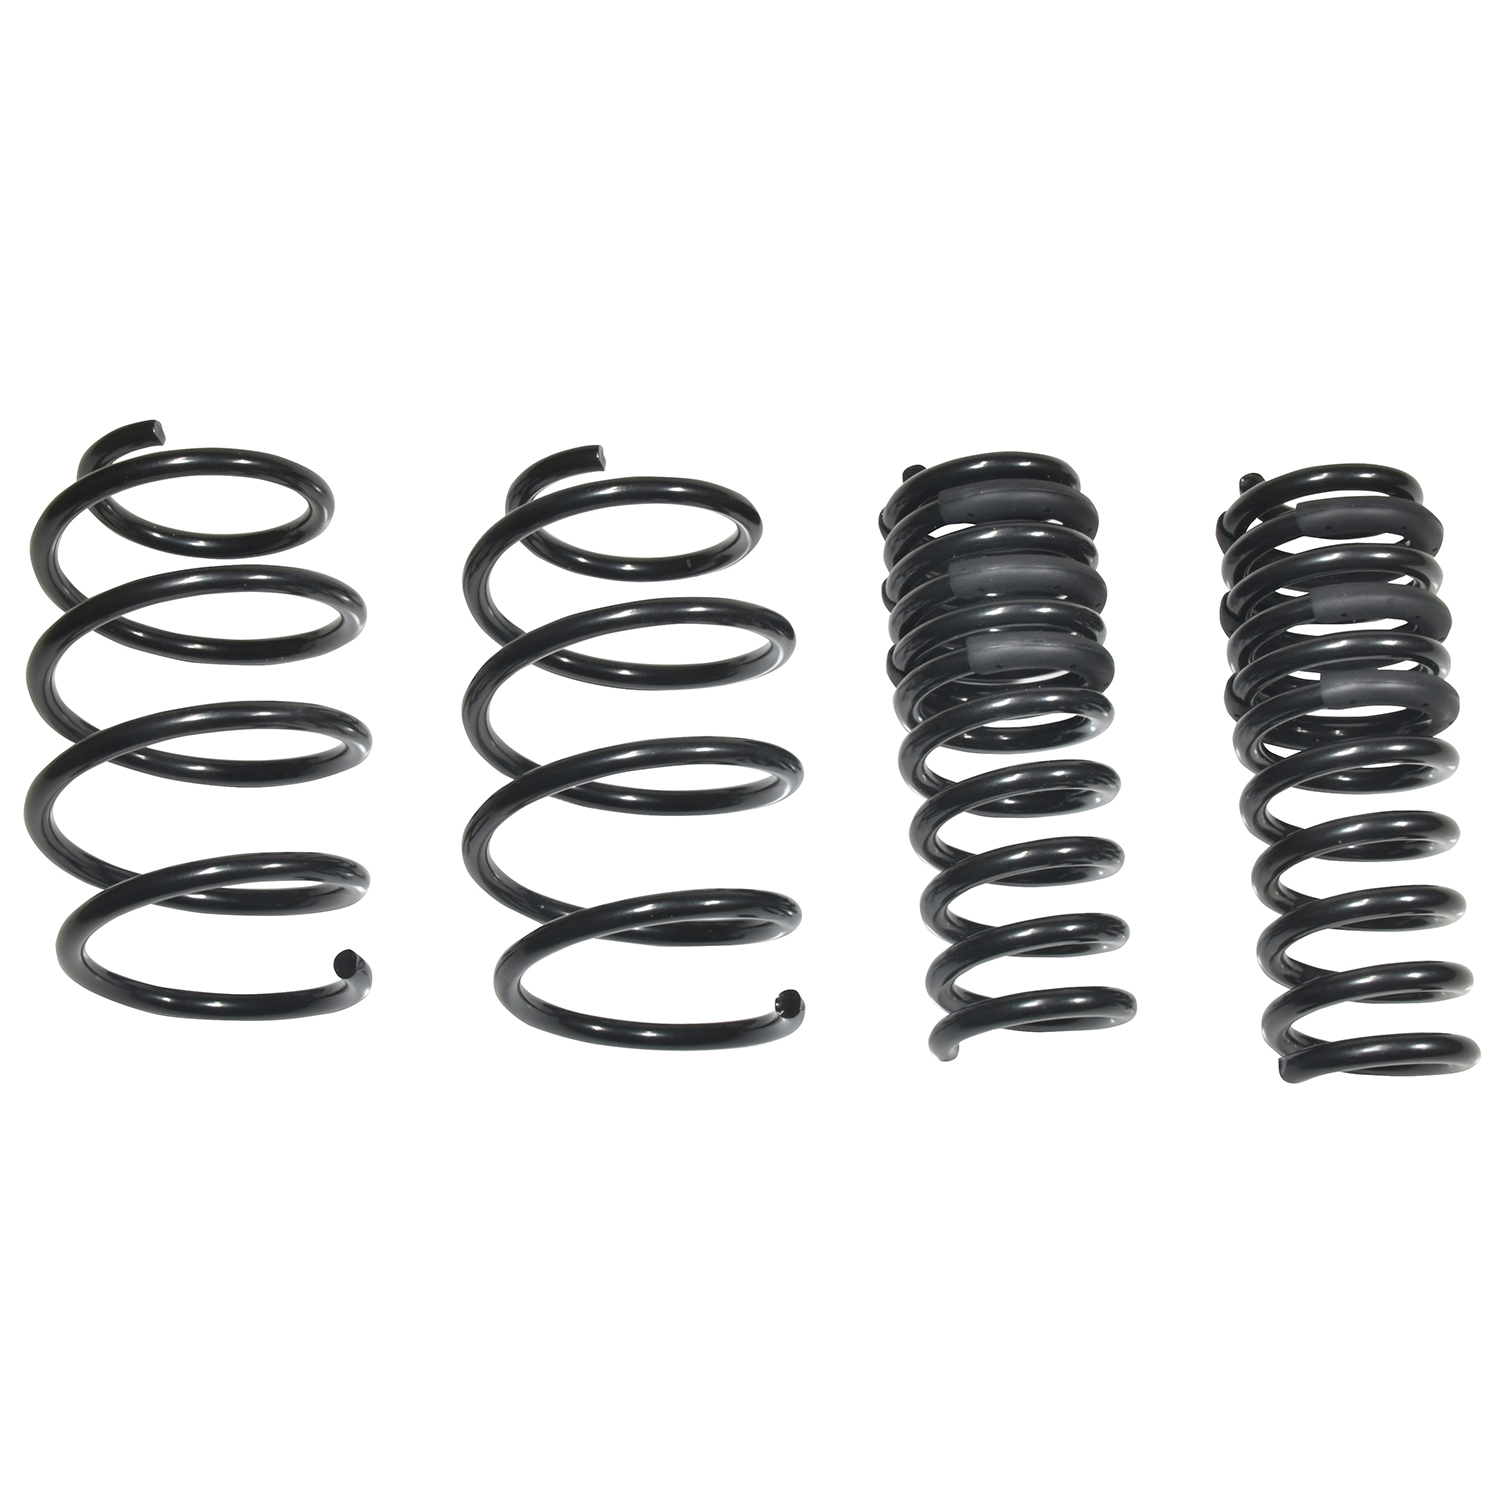 *SALE* 2016 - 2021 Camaro Sport Coil Springs from Hotchkis Sport Suspension